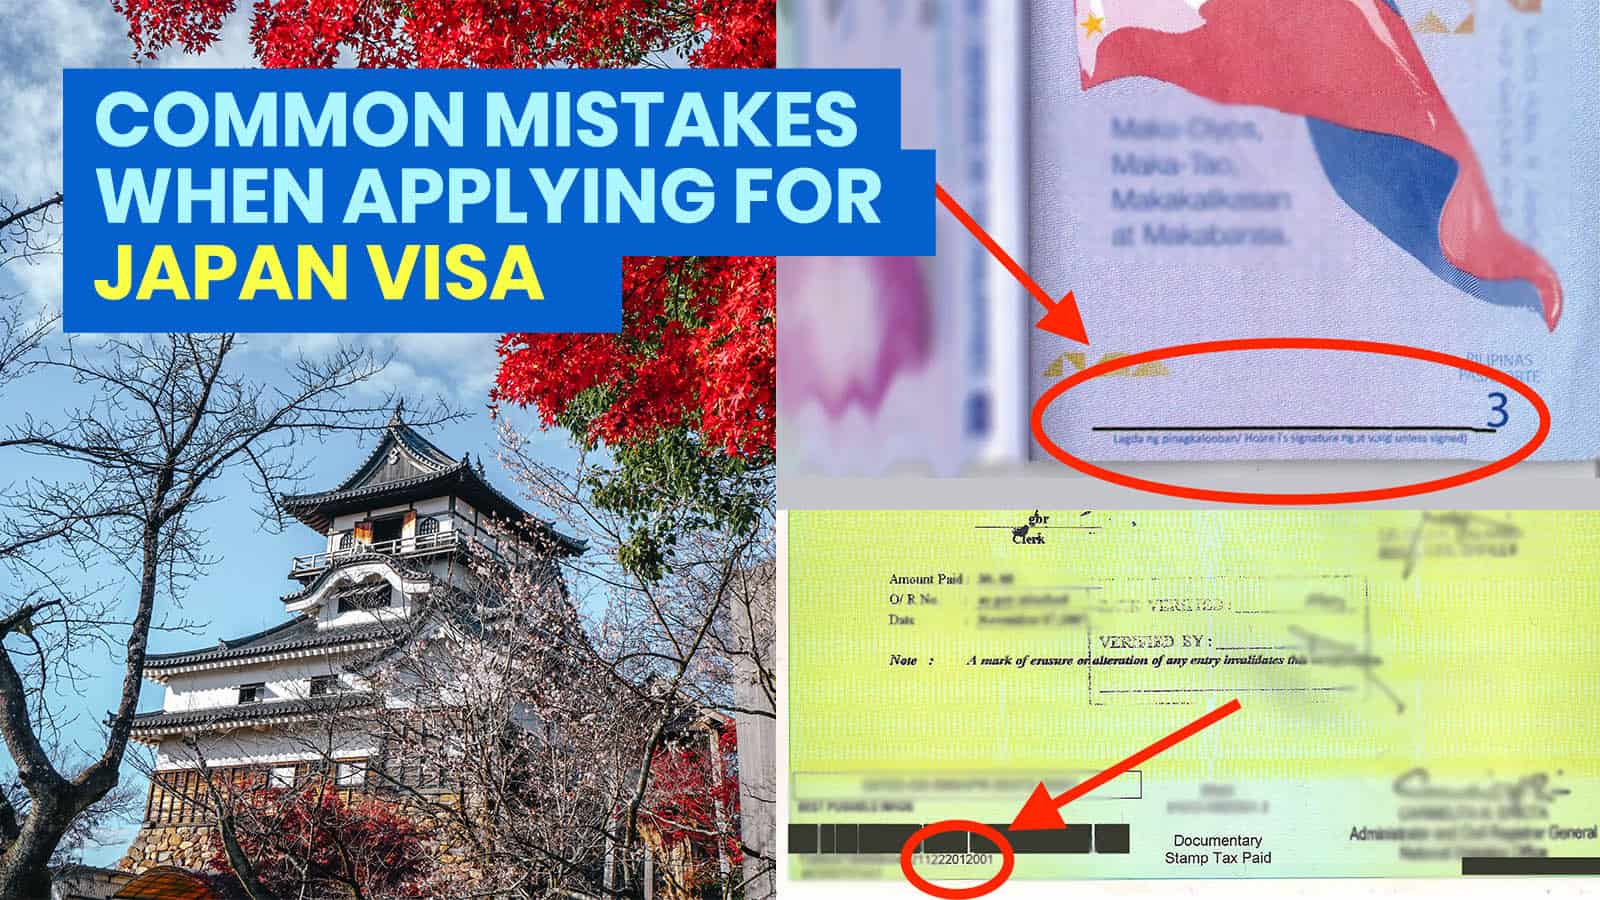 Avoid These 12 COMMON MISTAKES when Applying for a JAPAN VISA! The